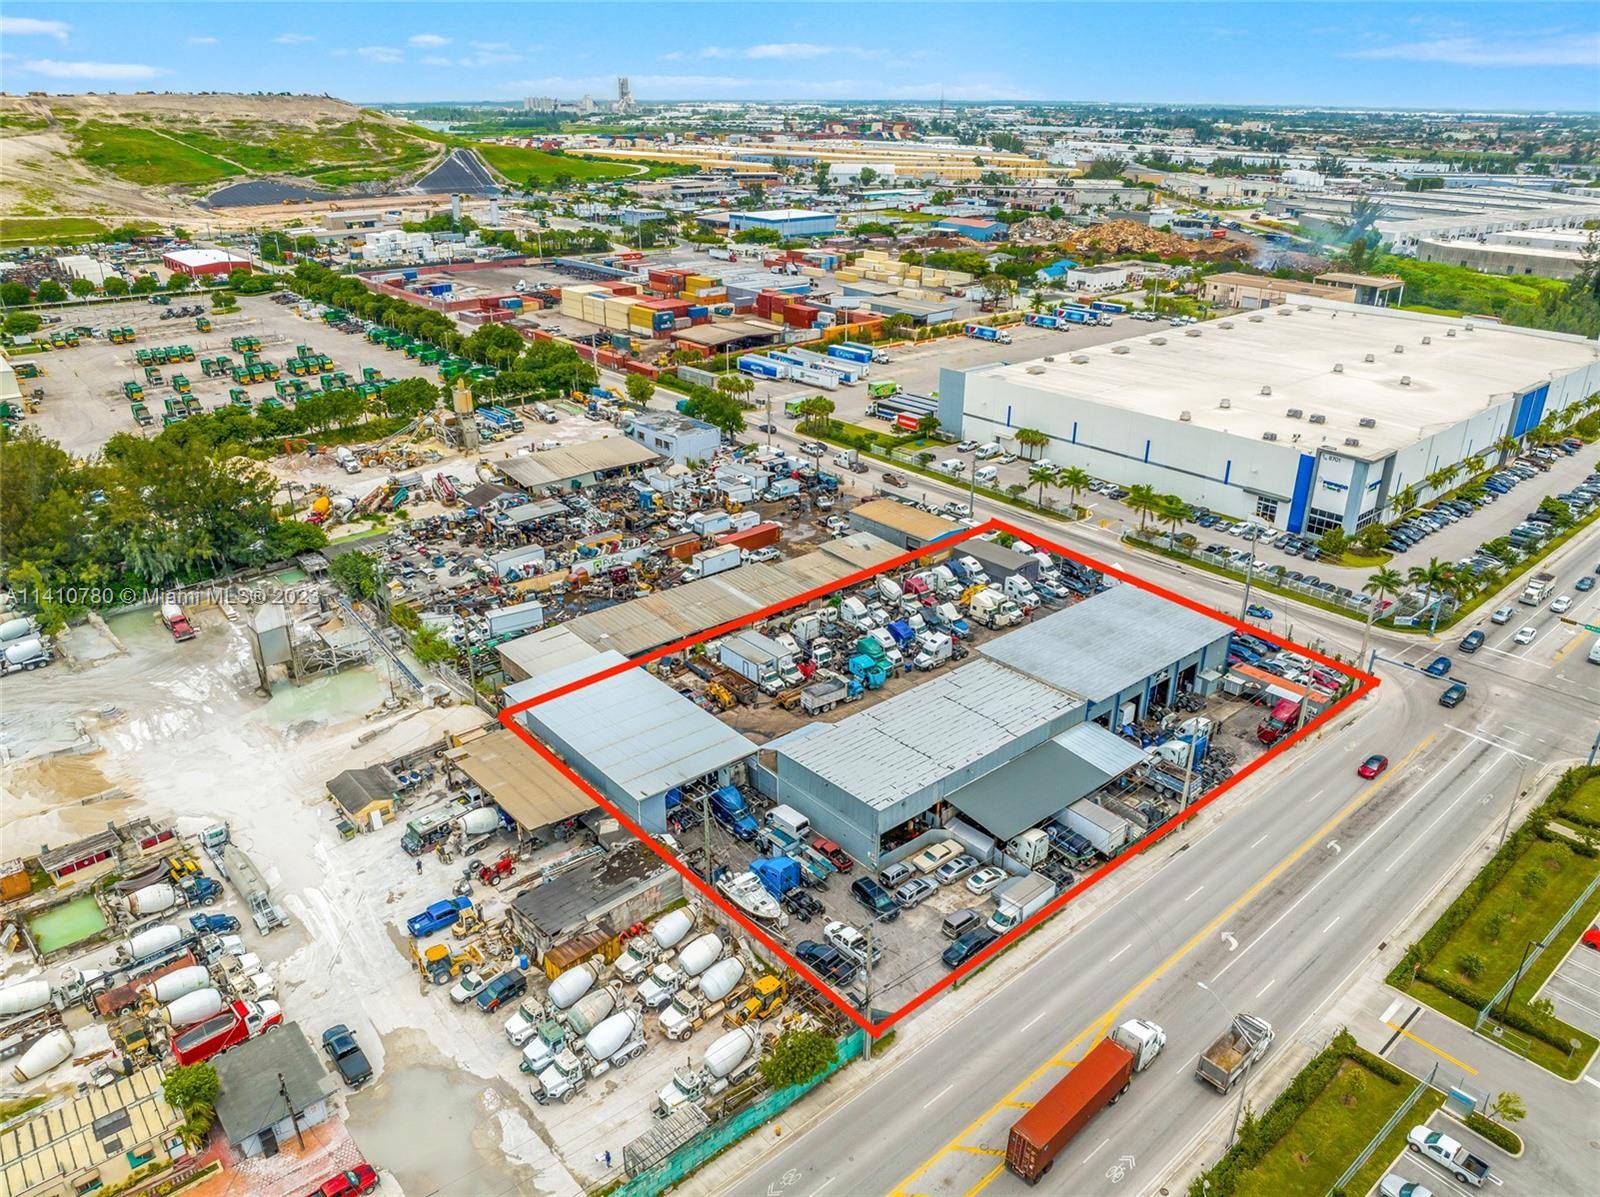 Fausto Commercial is pleased to present an exclusive opportunity to acquire this expansive industrial property which spans over 62, 000 square feet and holds a prime position at one of ...